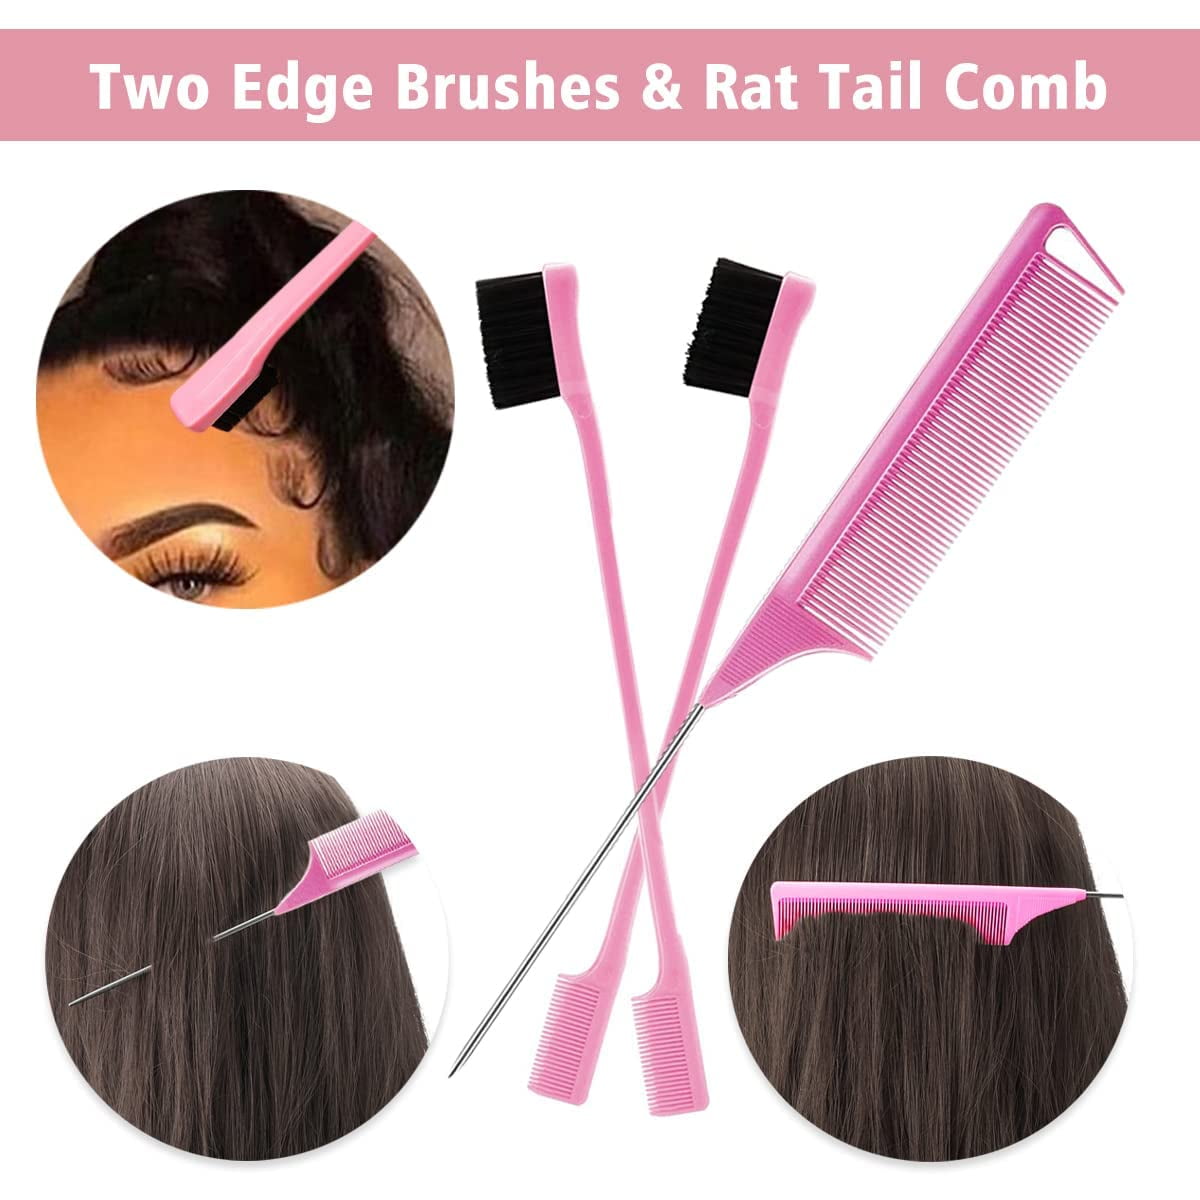 Wig Kit for Lace Front Wigs for Beginners 7Pcs, Lace Melting Elastic Band  for Wigs, Edge Laying Scarf with Eyebrow Razors, Tweezers, Edge Brush, Wig